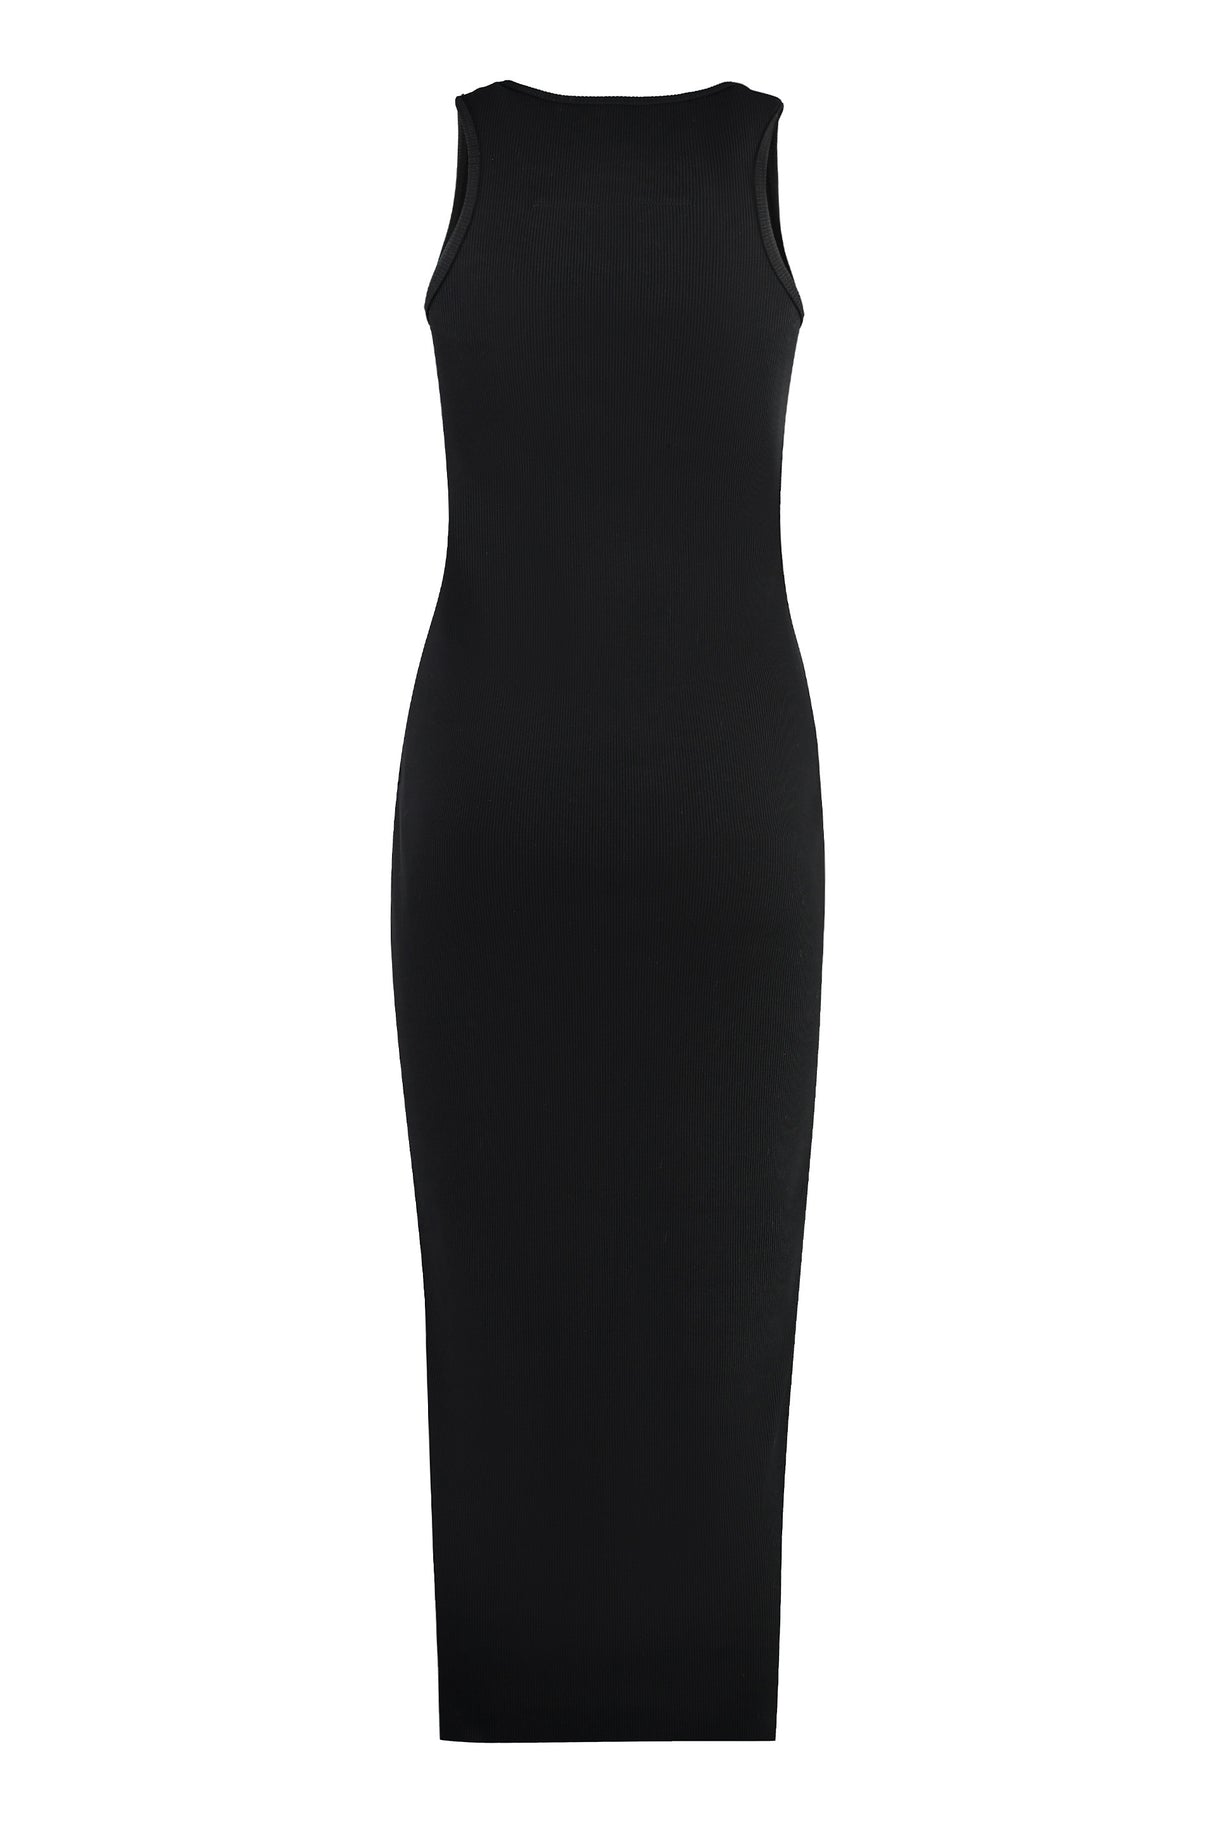 GIVENCHY Black Sheath Dress for Women - SS24 Collection